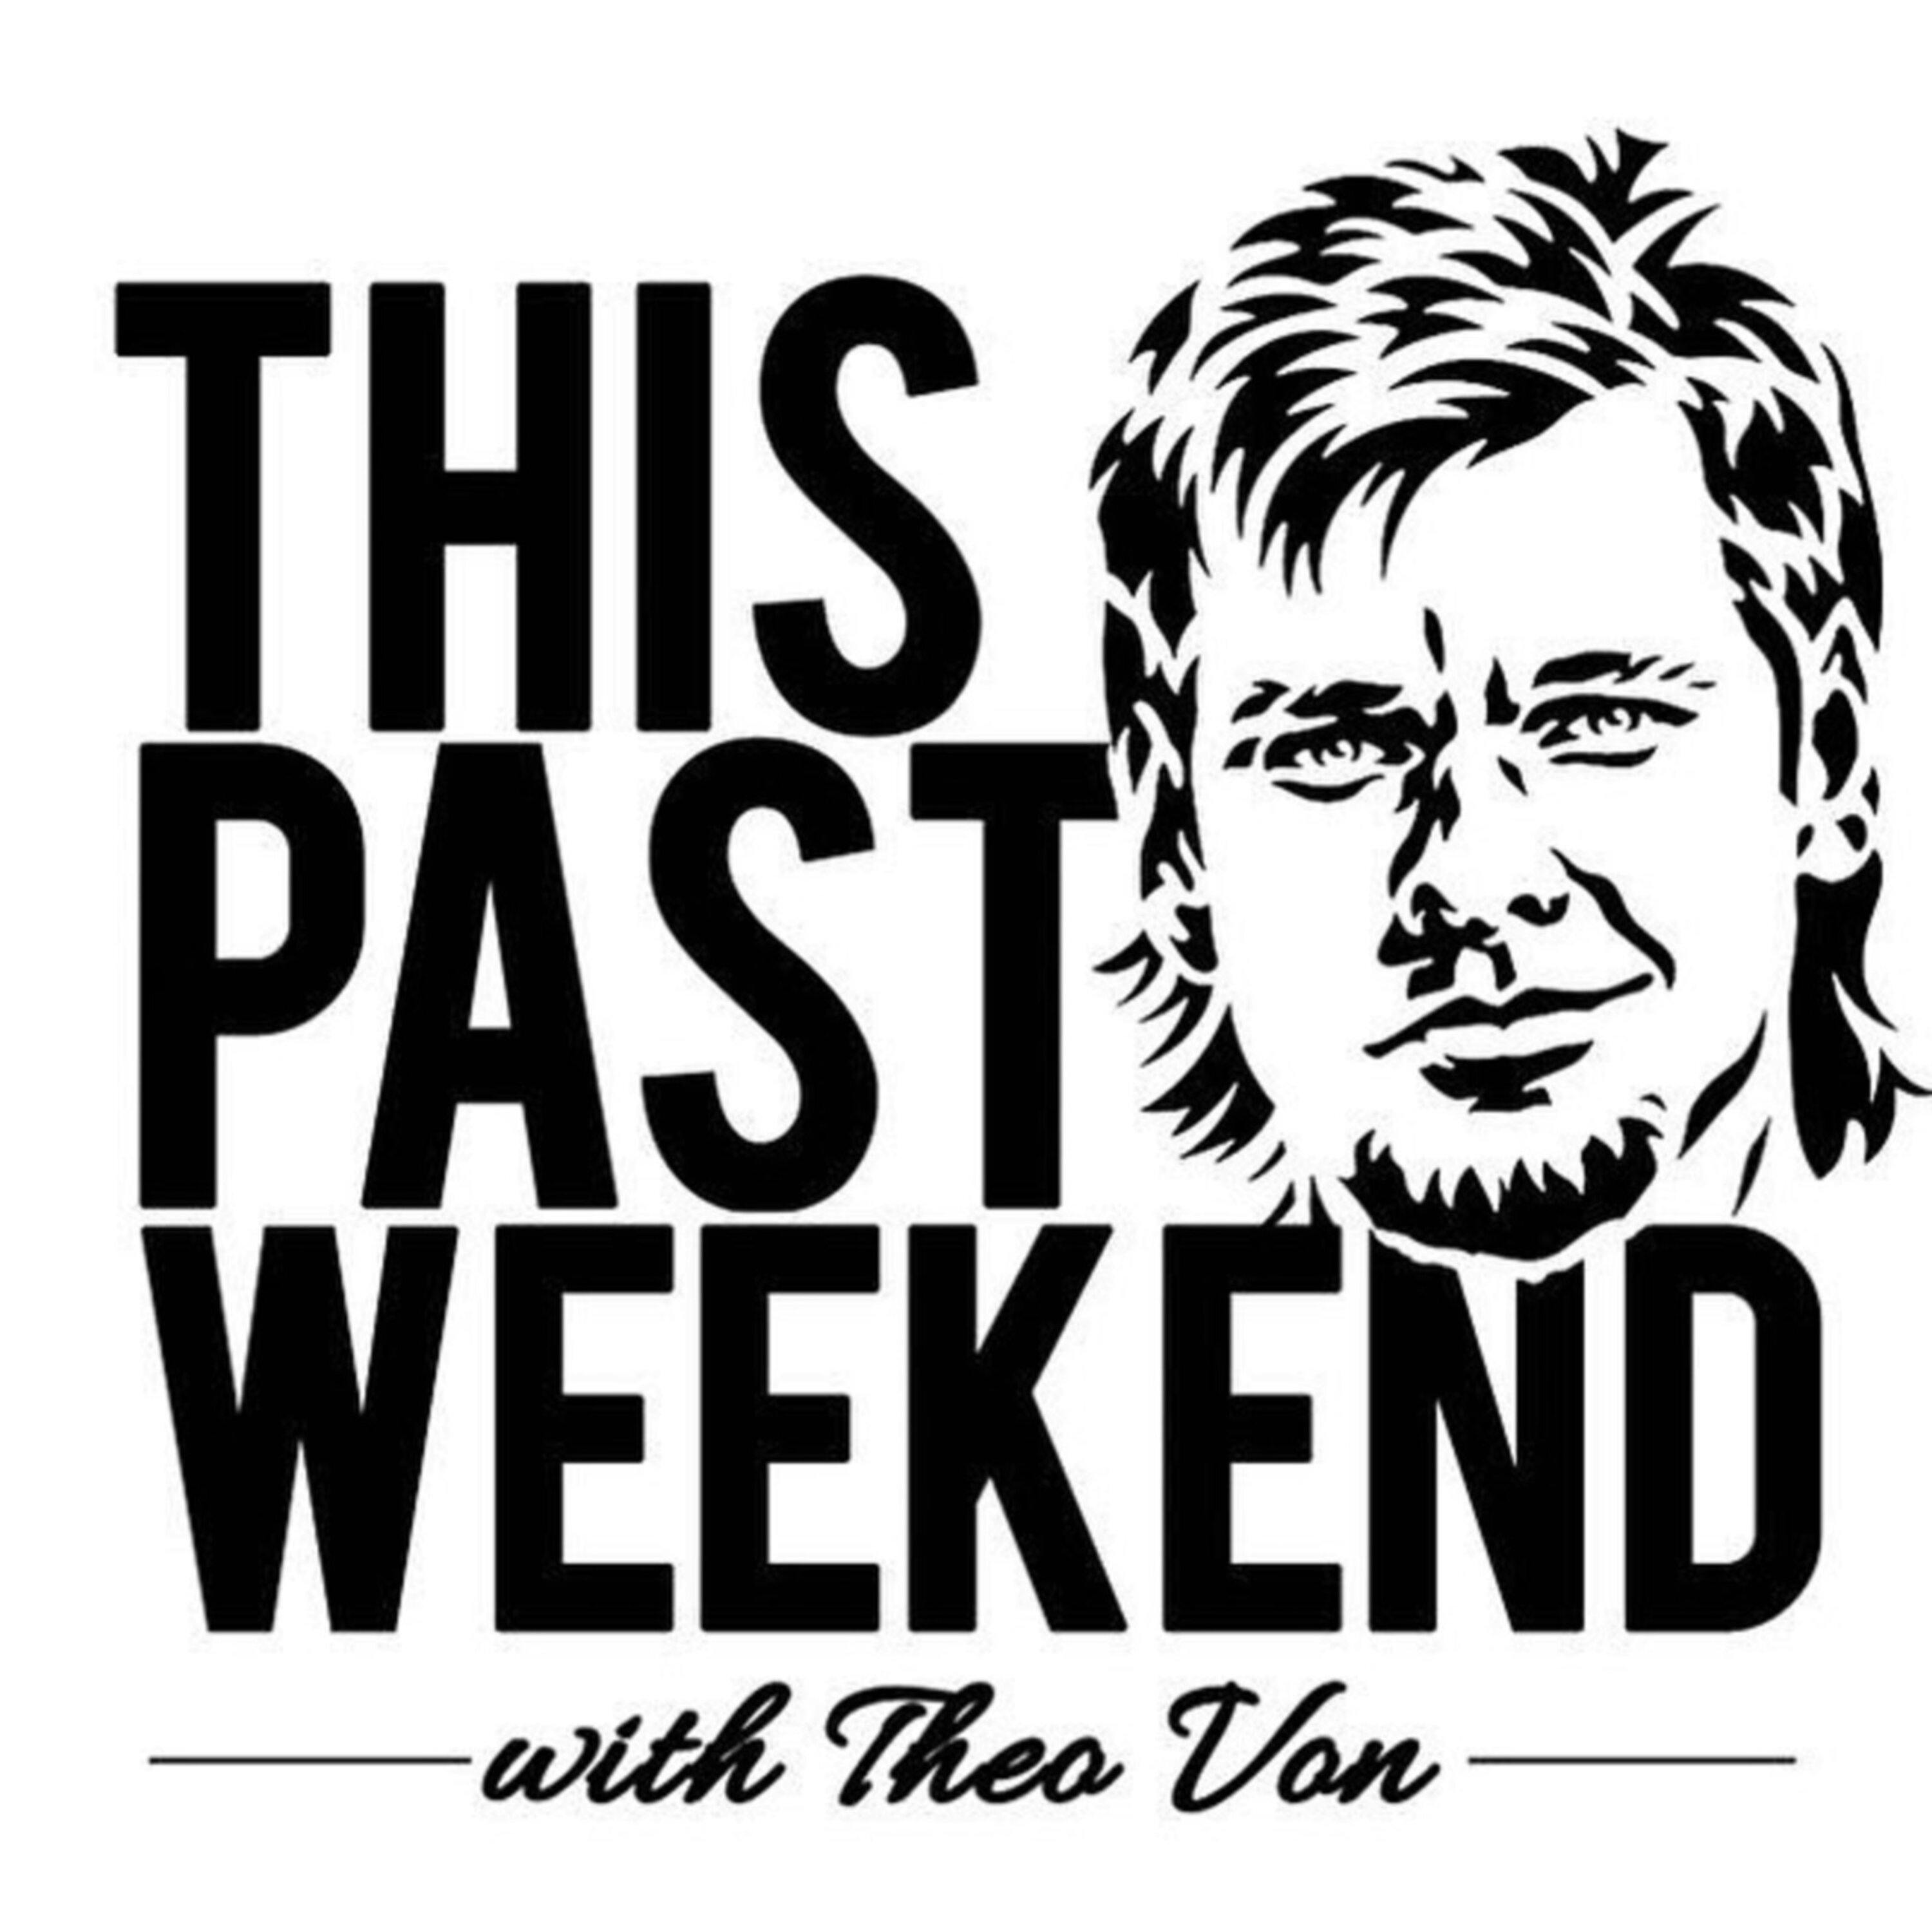 Snow Day | This Past Weekend #173 by Theo Von